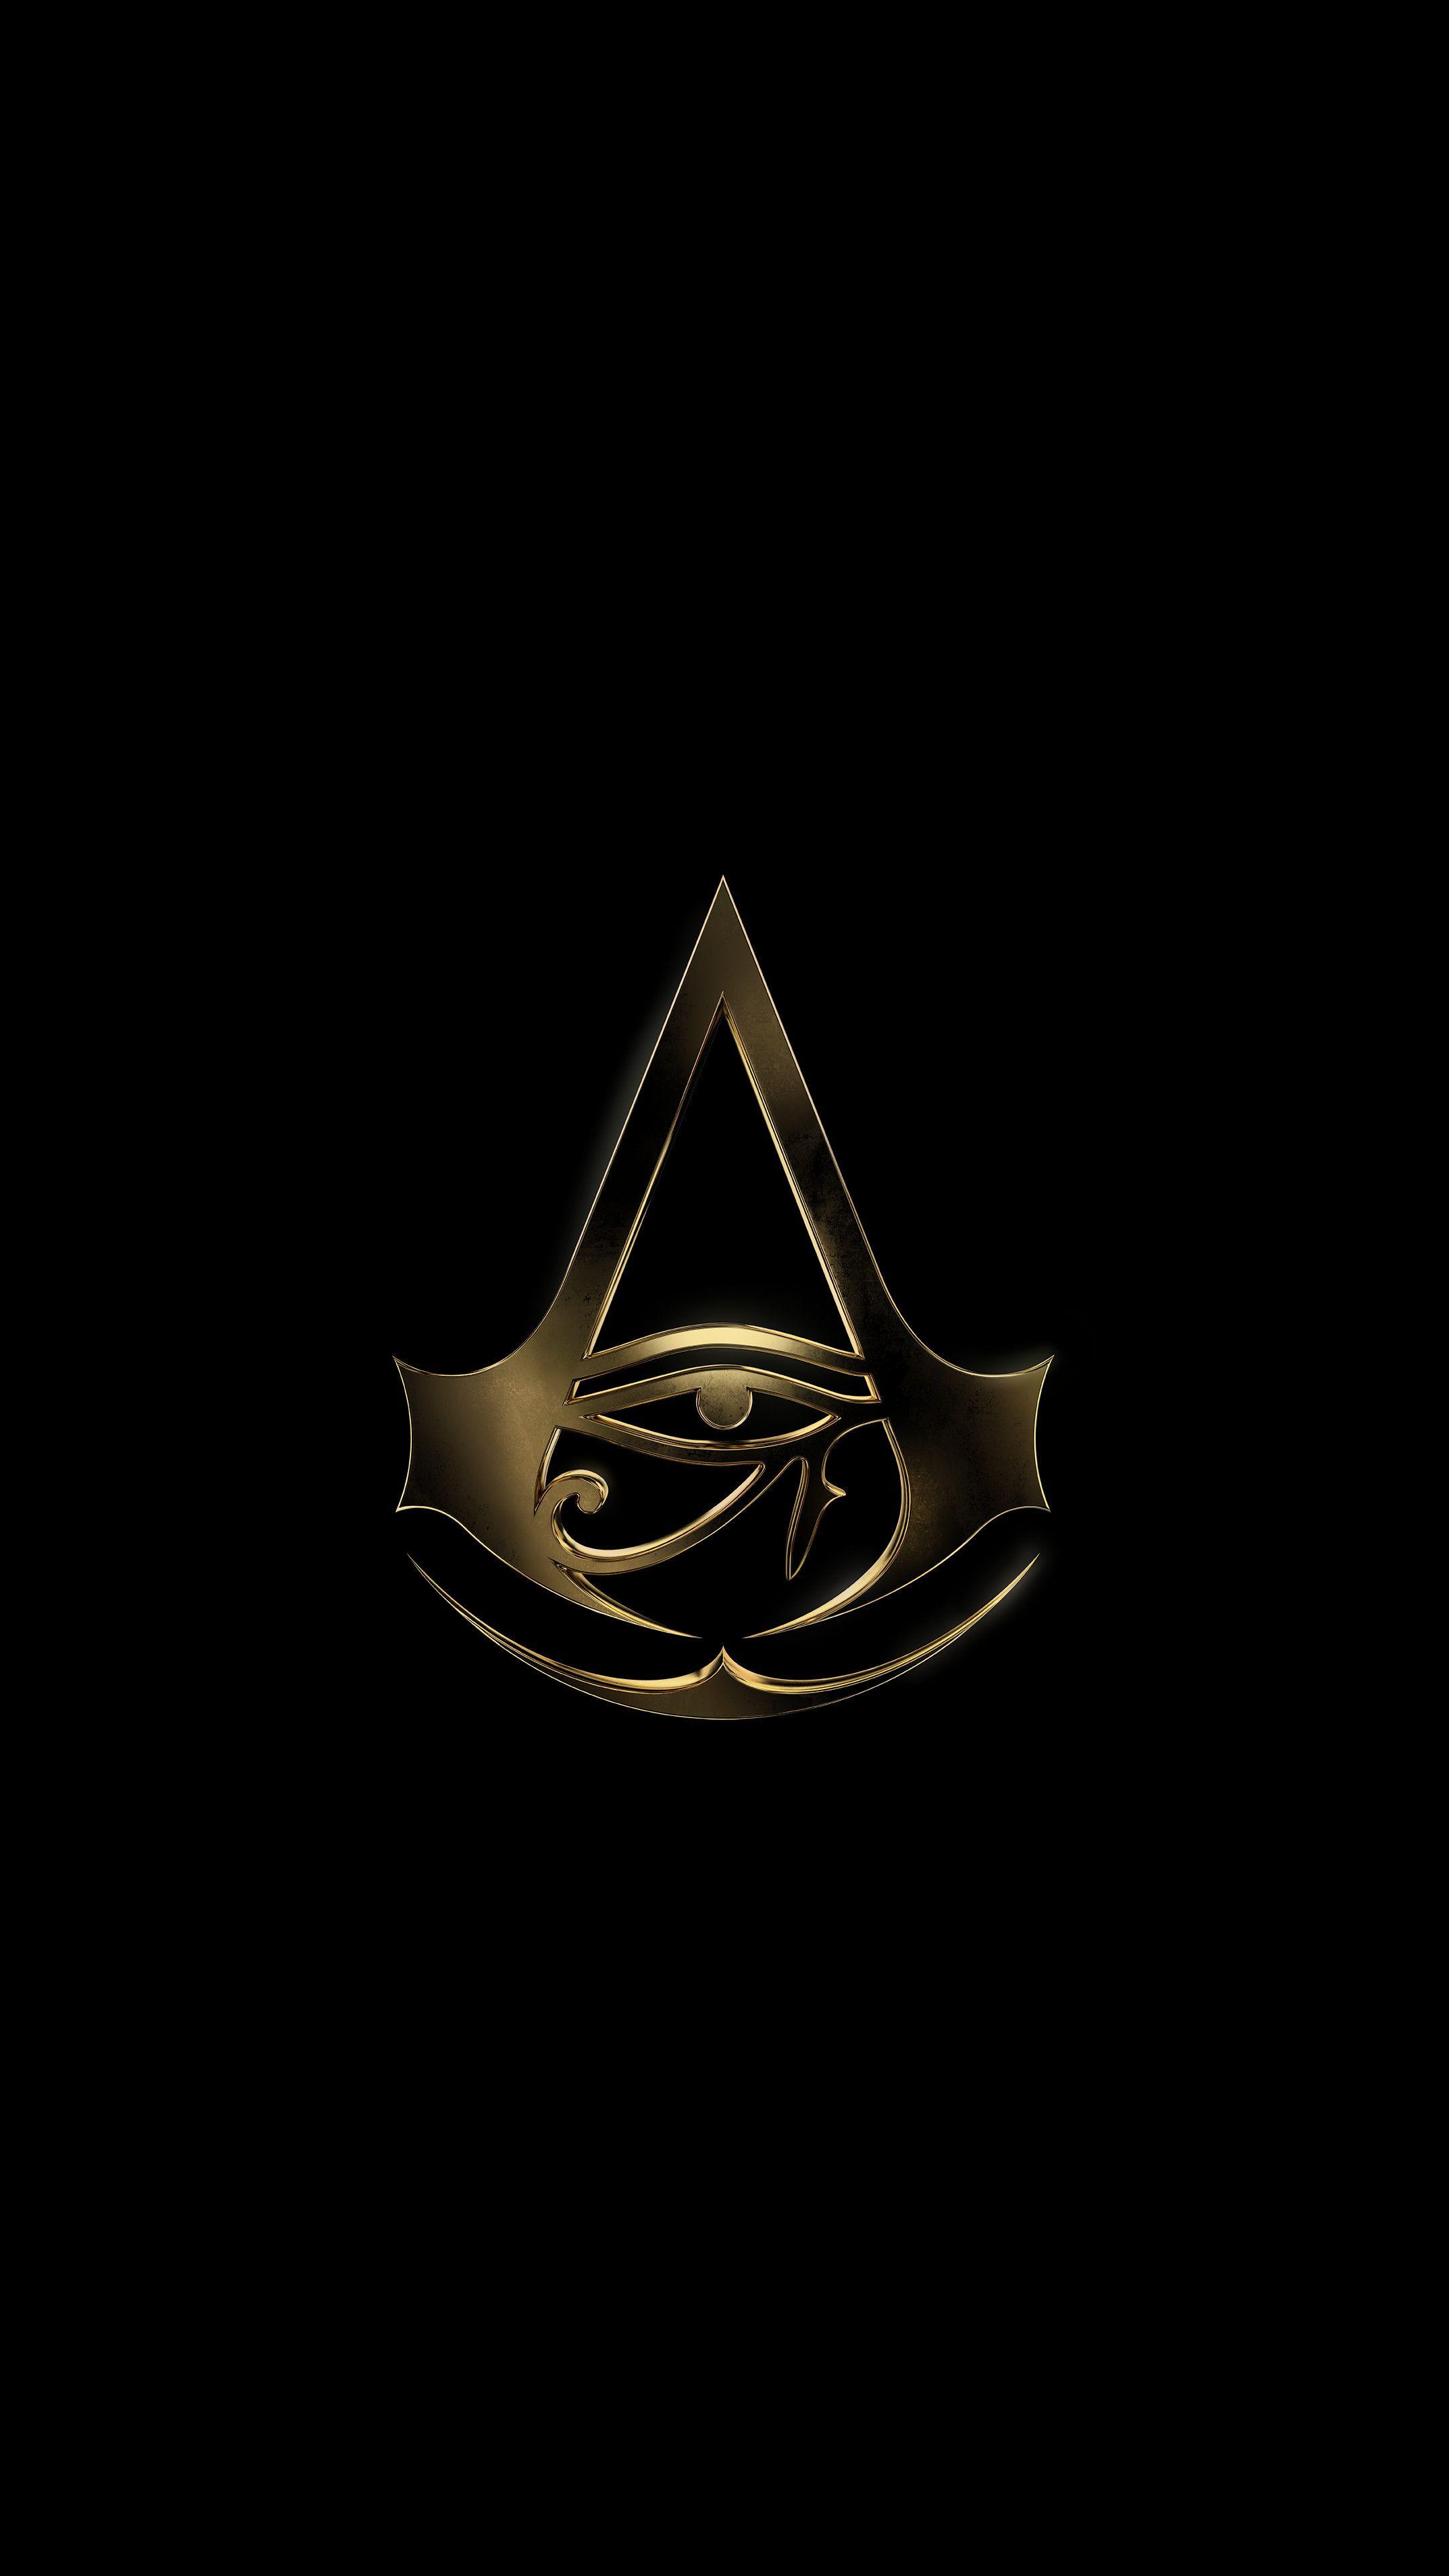 Assassin S Creed Logo Iphone Wallpapers Top Free Assassin S Creed Logo Iphone Backgrounds Wallpaperaccess